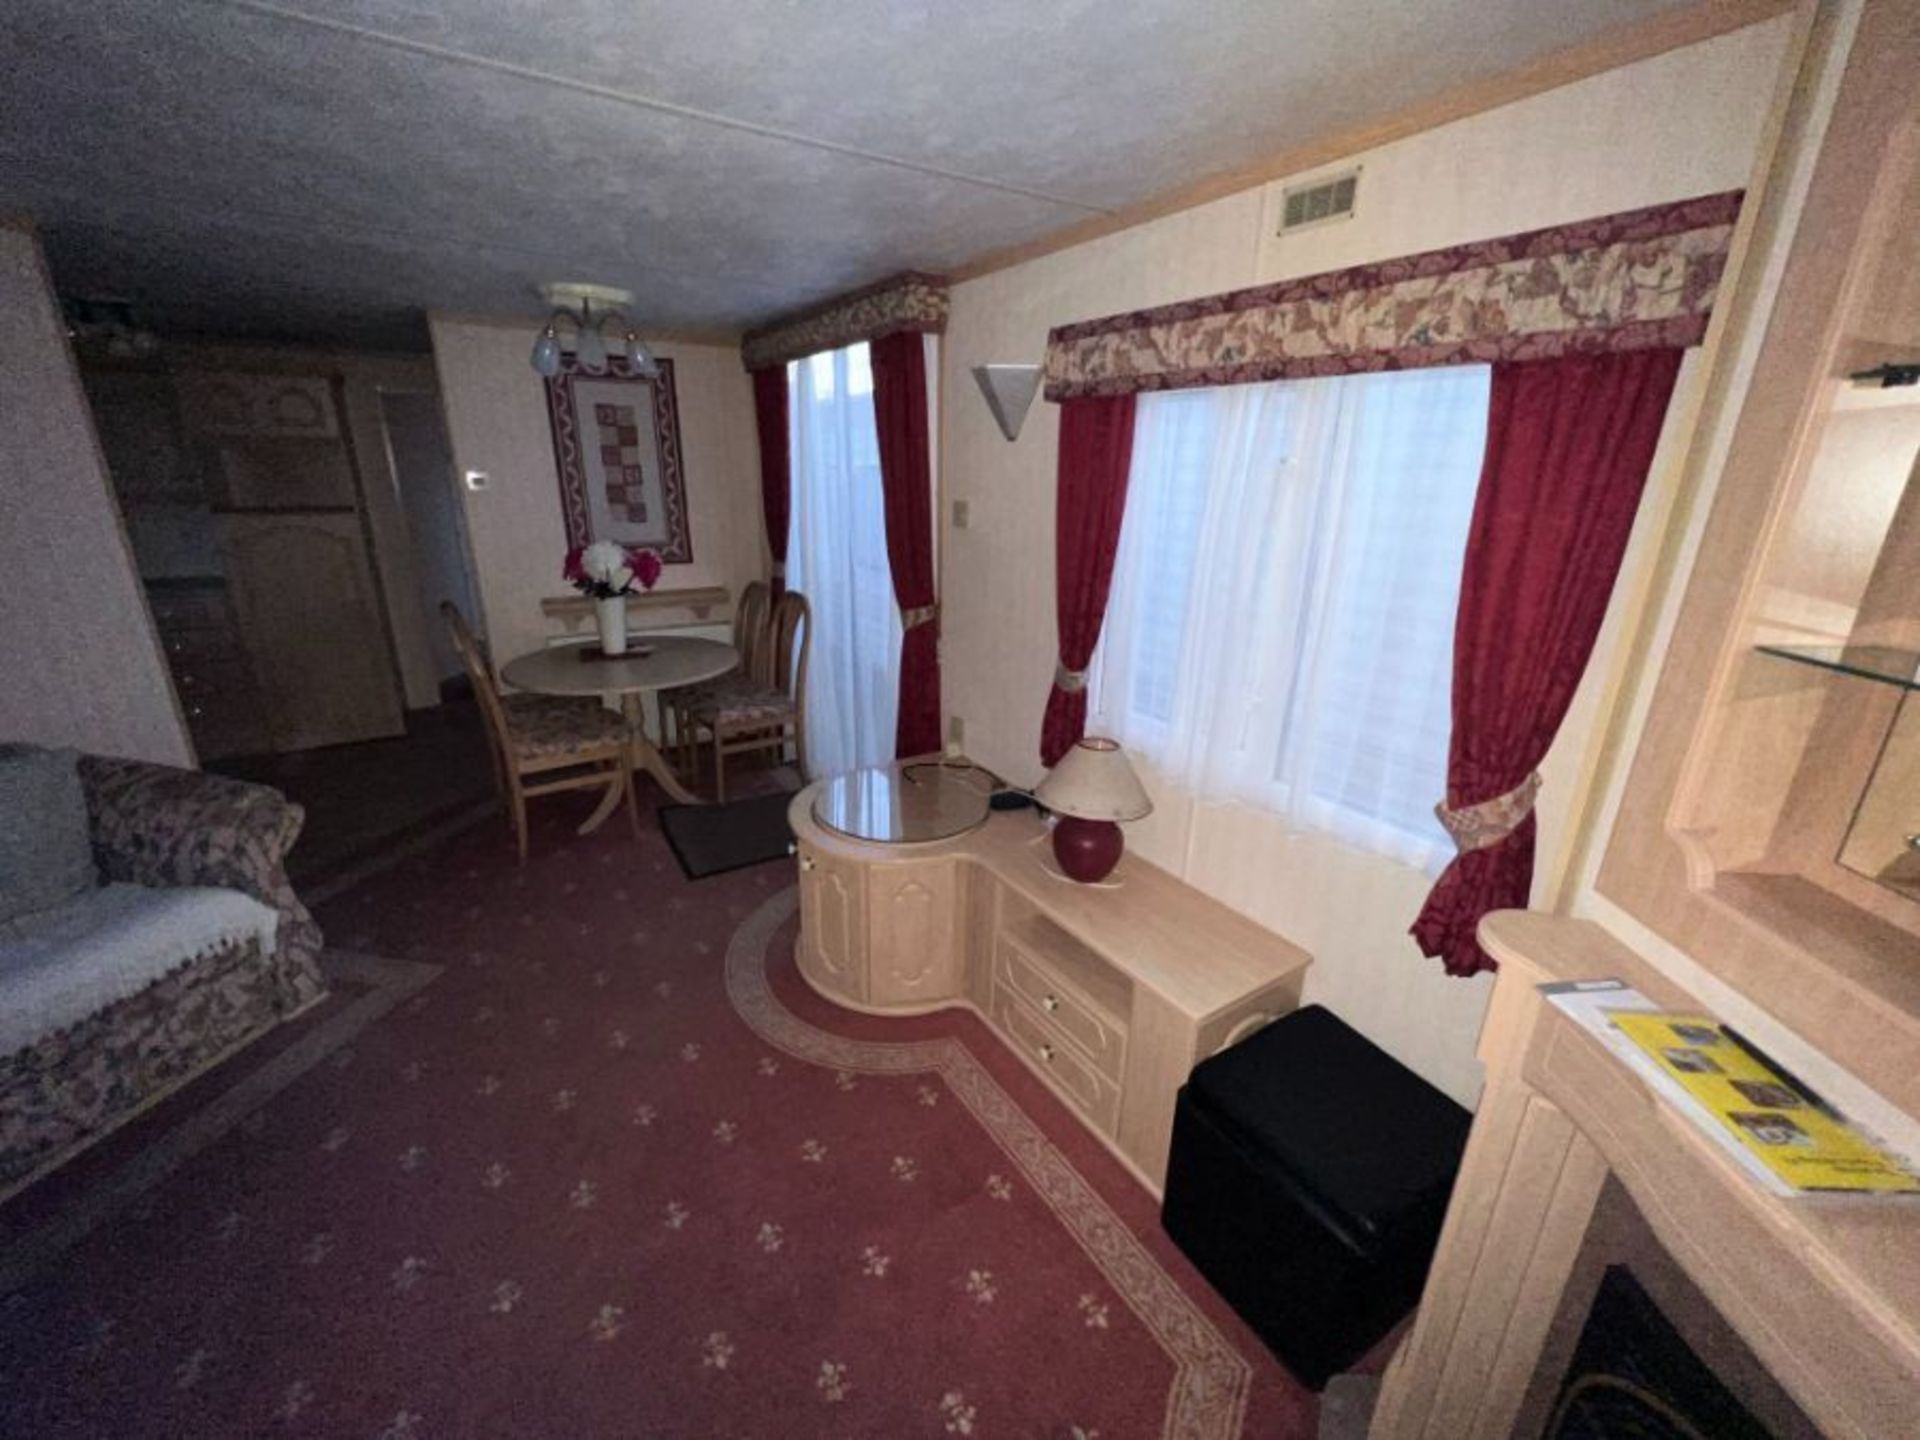 WILLERBY LYNDHURST 37FT X 12FT, 2 BEDROOM STATIC CARAVAN DOUBLE GLAZED & CENTRAL HEATING - LOCATED - Image 43 of 50